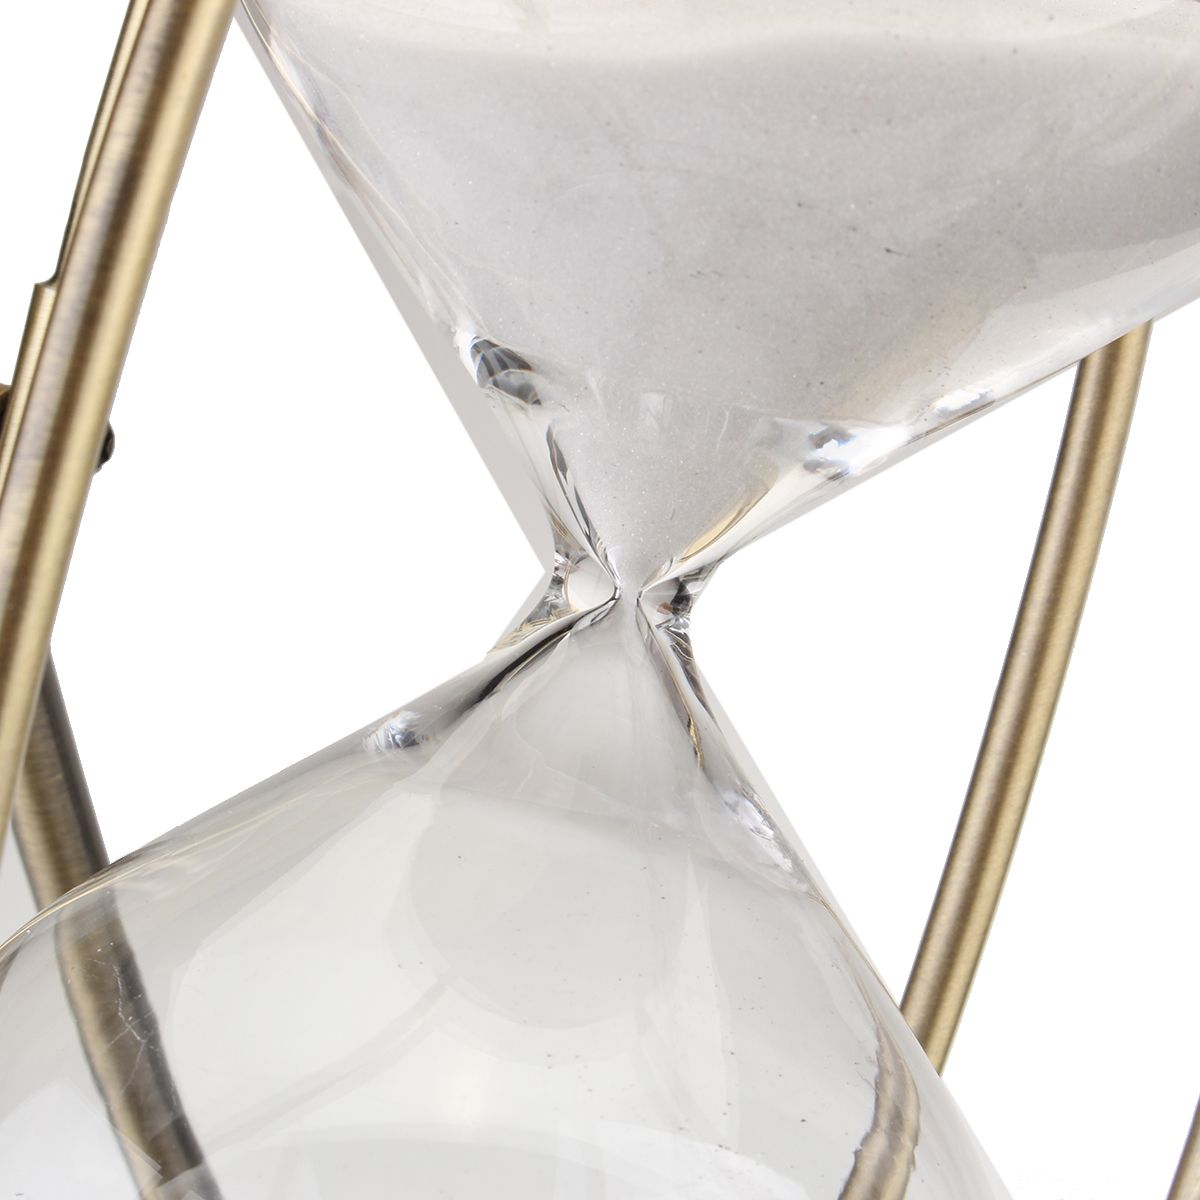 30-Minute-Rolating-Sand-Hourglass-Sandglass-Sand-Timer-Clock-Home-Room-Decorations-Gift-1379565